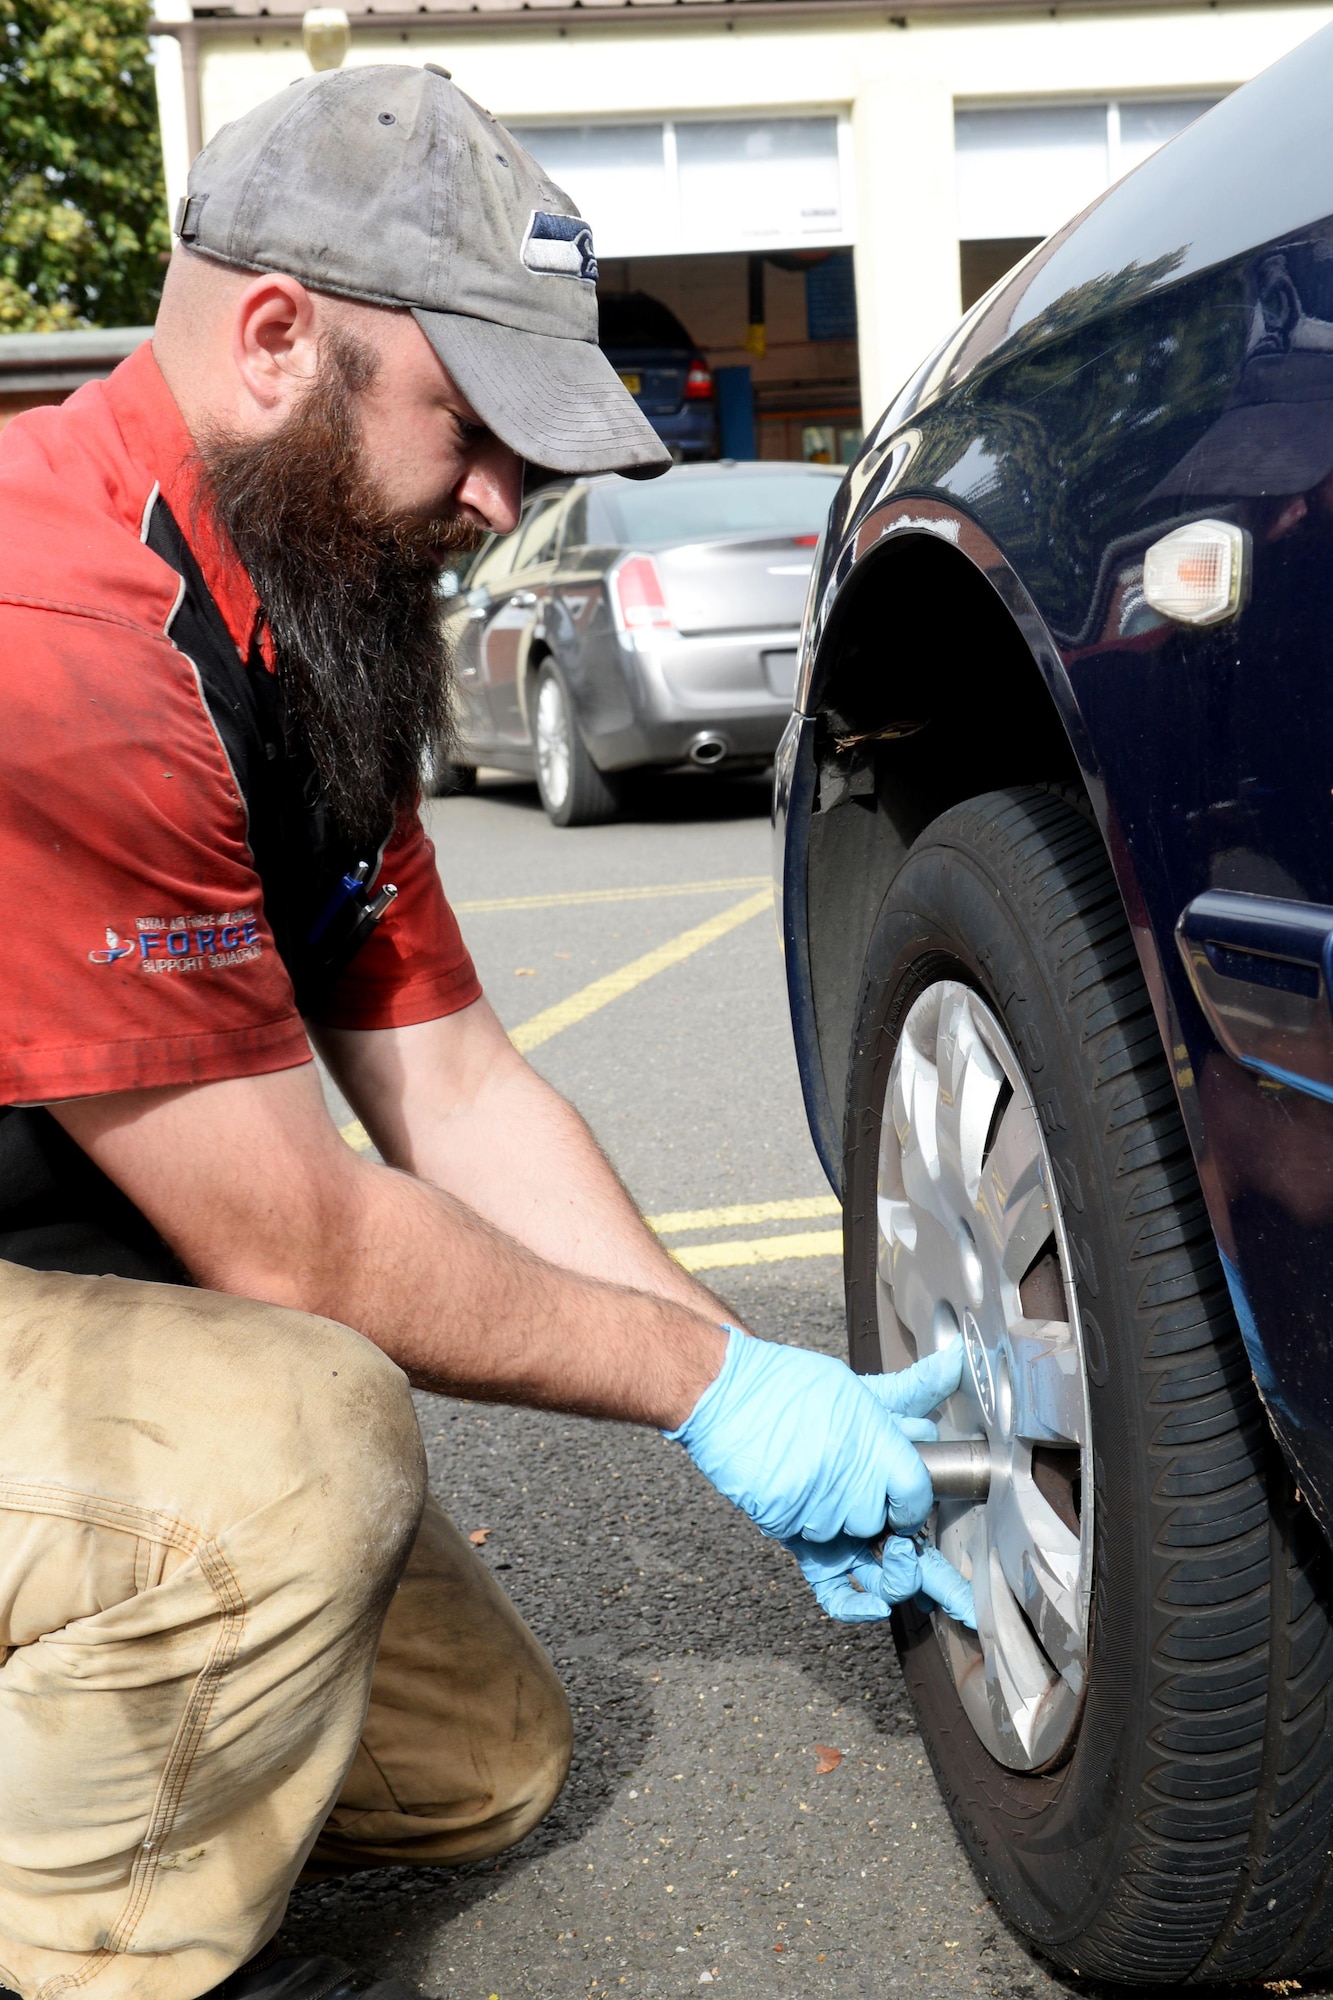 Jacob Crowell, 100th Force Support Squadron Auto Hobby Shop automotive technician, changes a tire Sept. 28, 2016, on RAF Mildenhall, England. Even if it’s something as simple as changing a flat tire, being prepared can save lives.  For more information and a full listing of recommended items go to www.ready.gov/build-a-kit. (U.S. Air Force photo by Airman 1st Class Tenley Long)